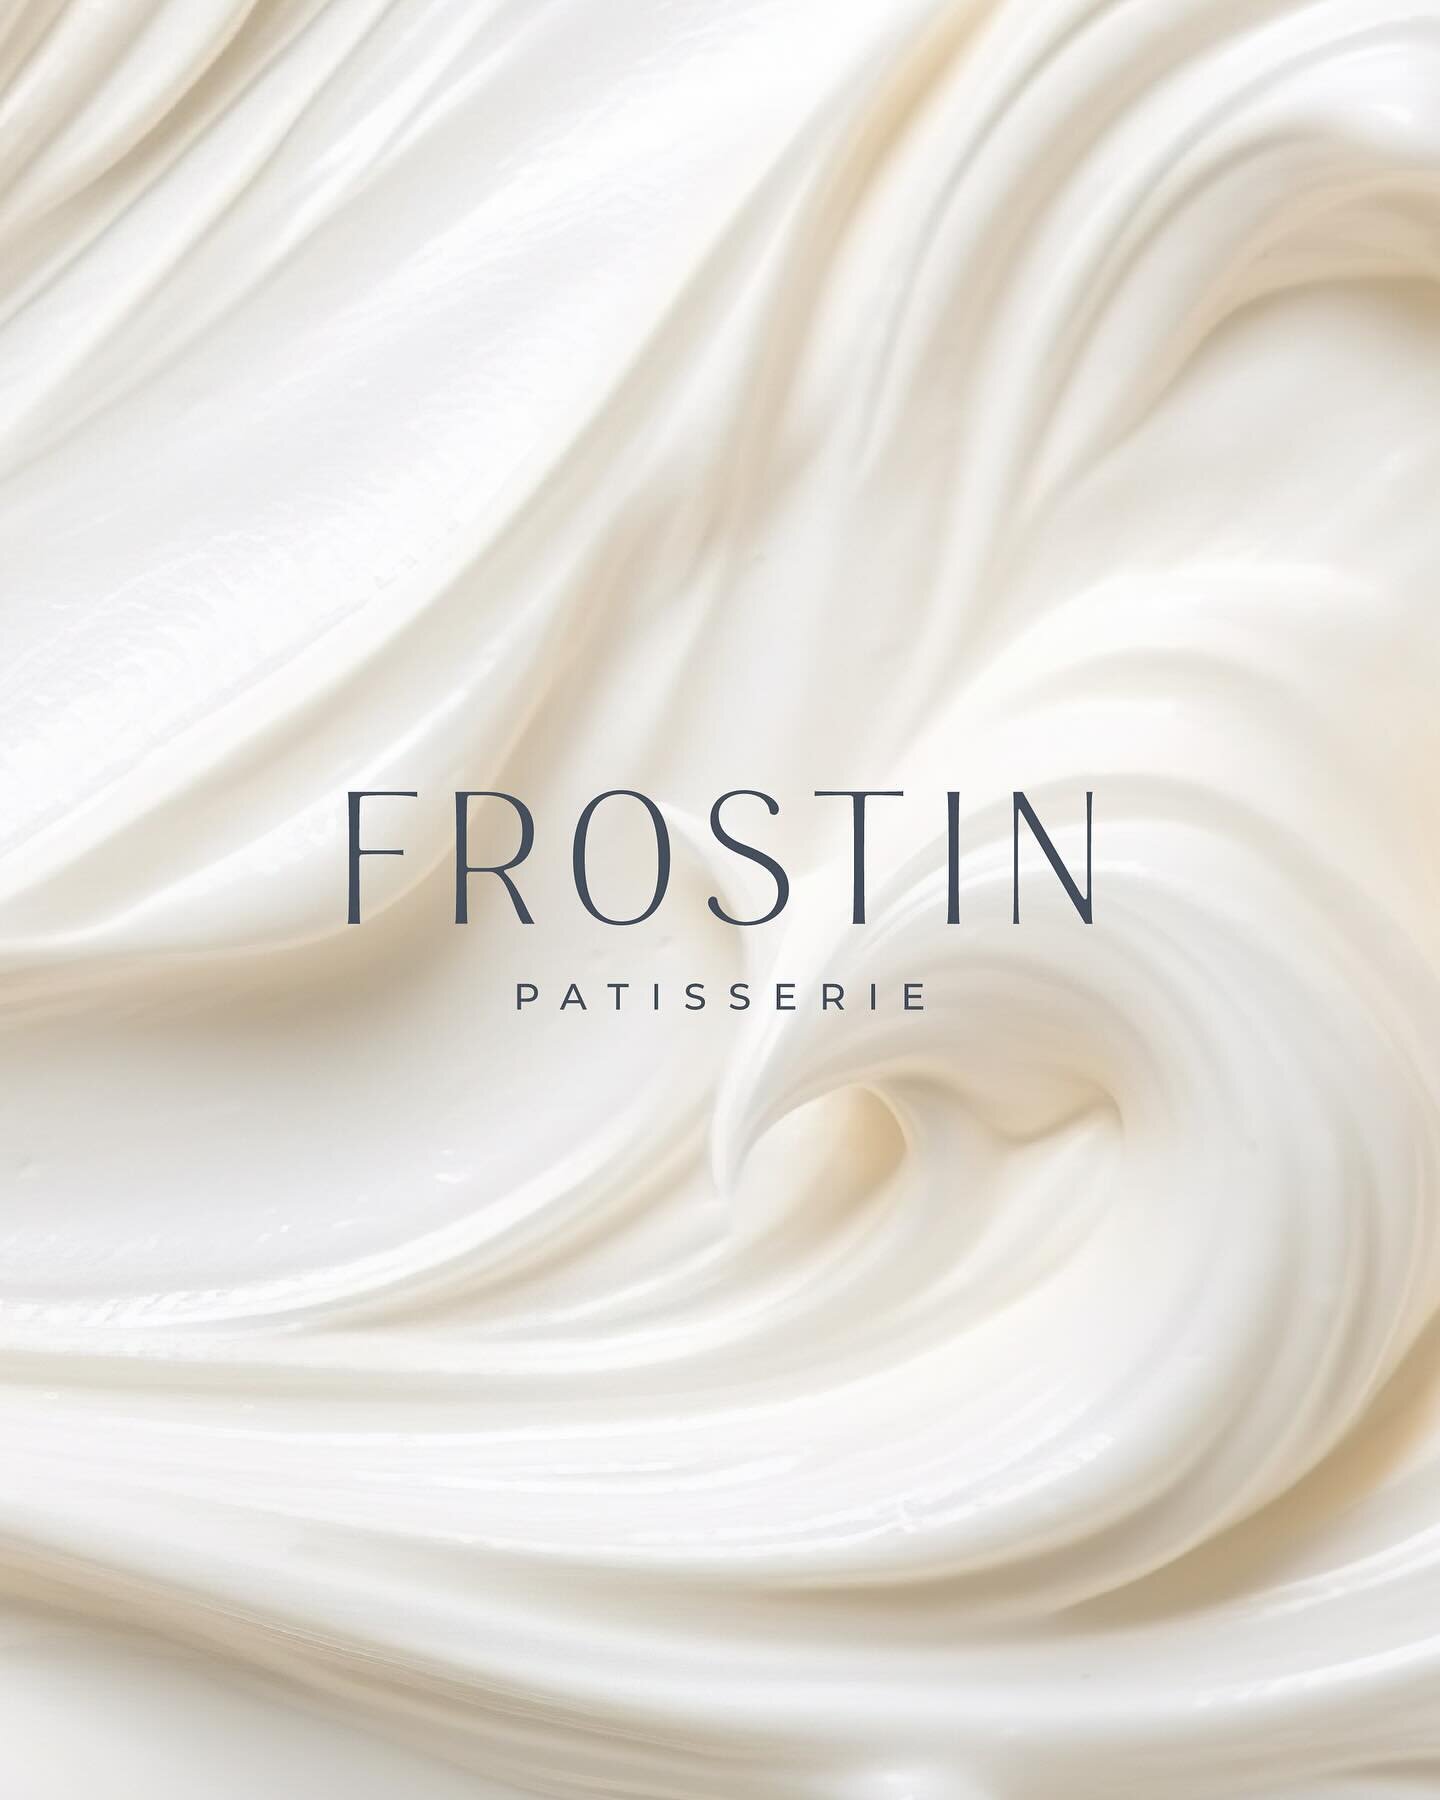 Can&rsquo;t wait for this one to launch! Delicious cookies paired with decadent frostings&hellip; yes, please! Loved creating this branding for @frostinpatisserie 🍪